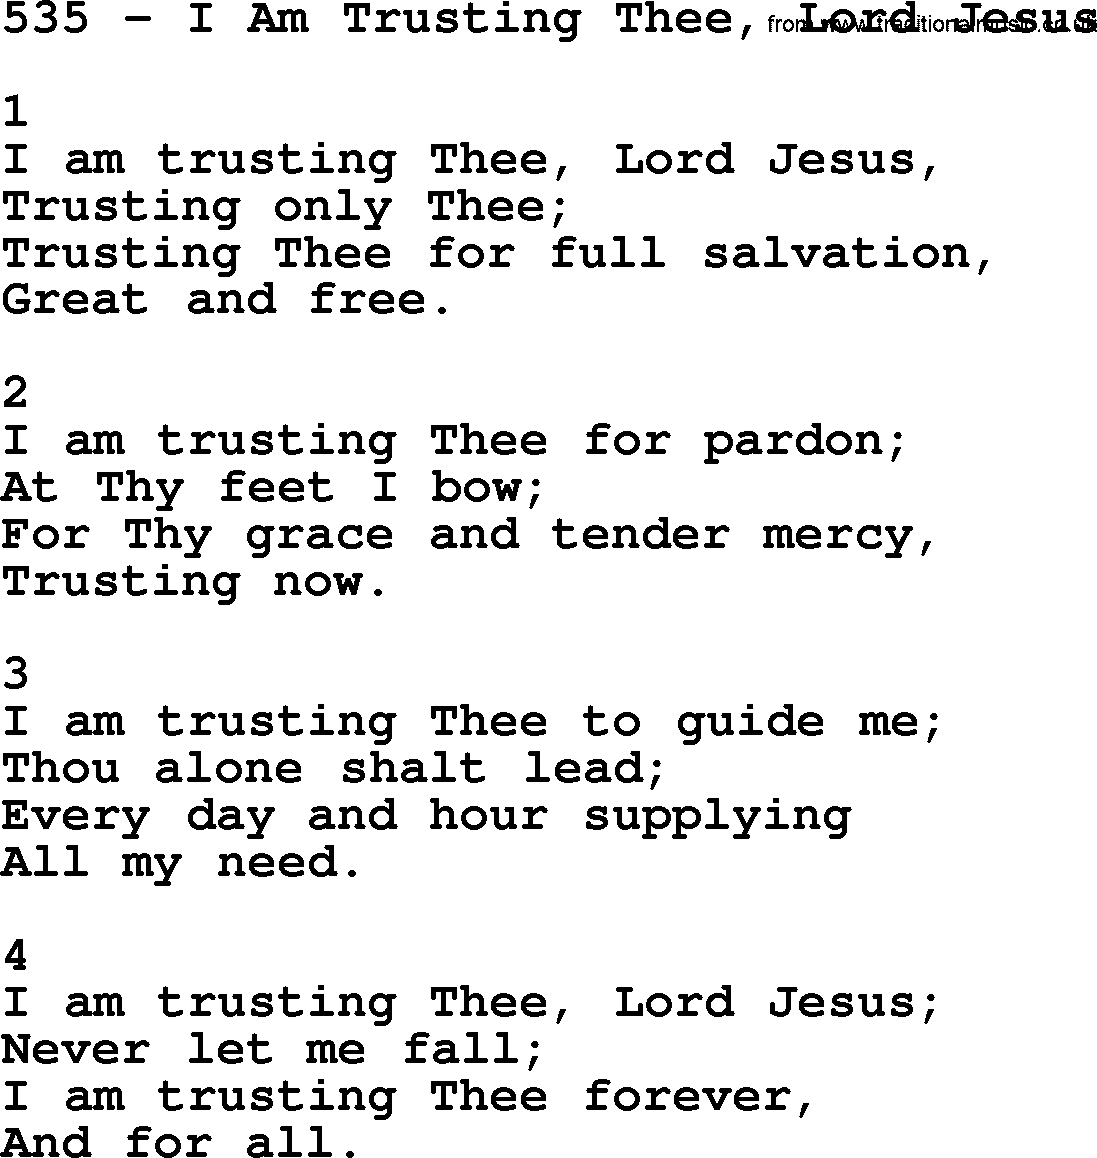 Complete Adventis Hymnal, title: 535-I Am Trusting Thee, Lord Jesus, with lyrics, midi, mp3, powerpoints(PPT) and PDF,